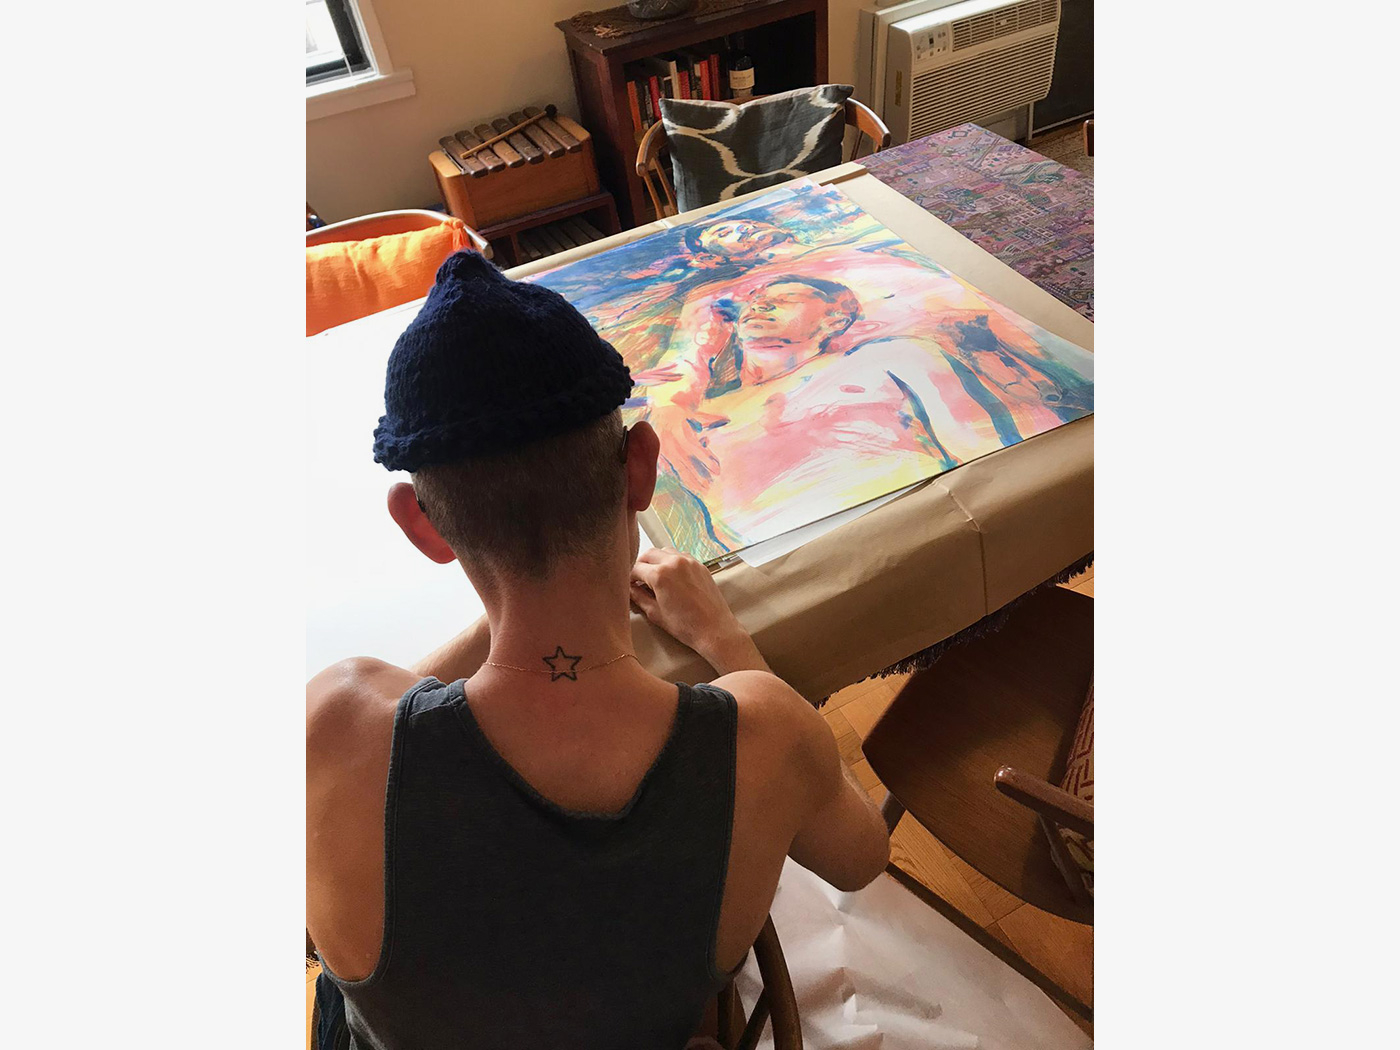 Doron signs Brice and Robert (2020) lithograph in his New York Studio, 2020